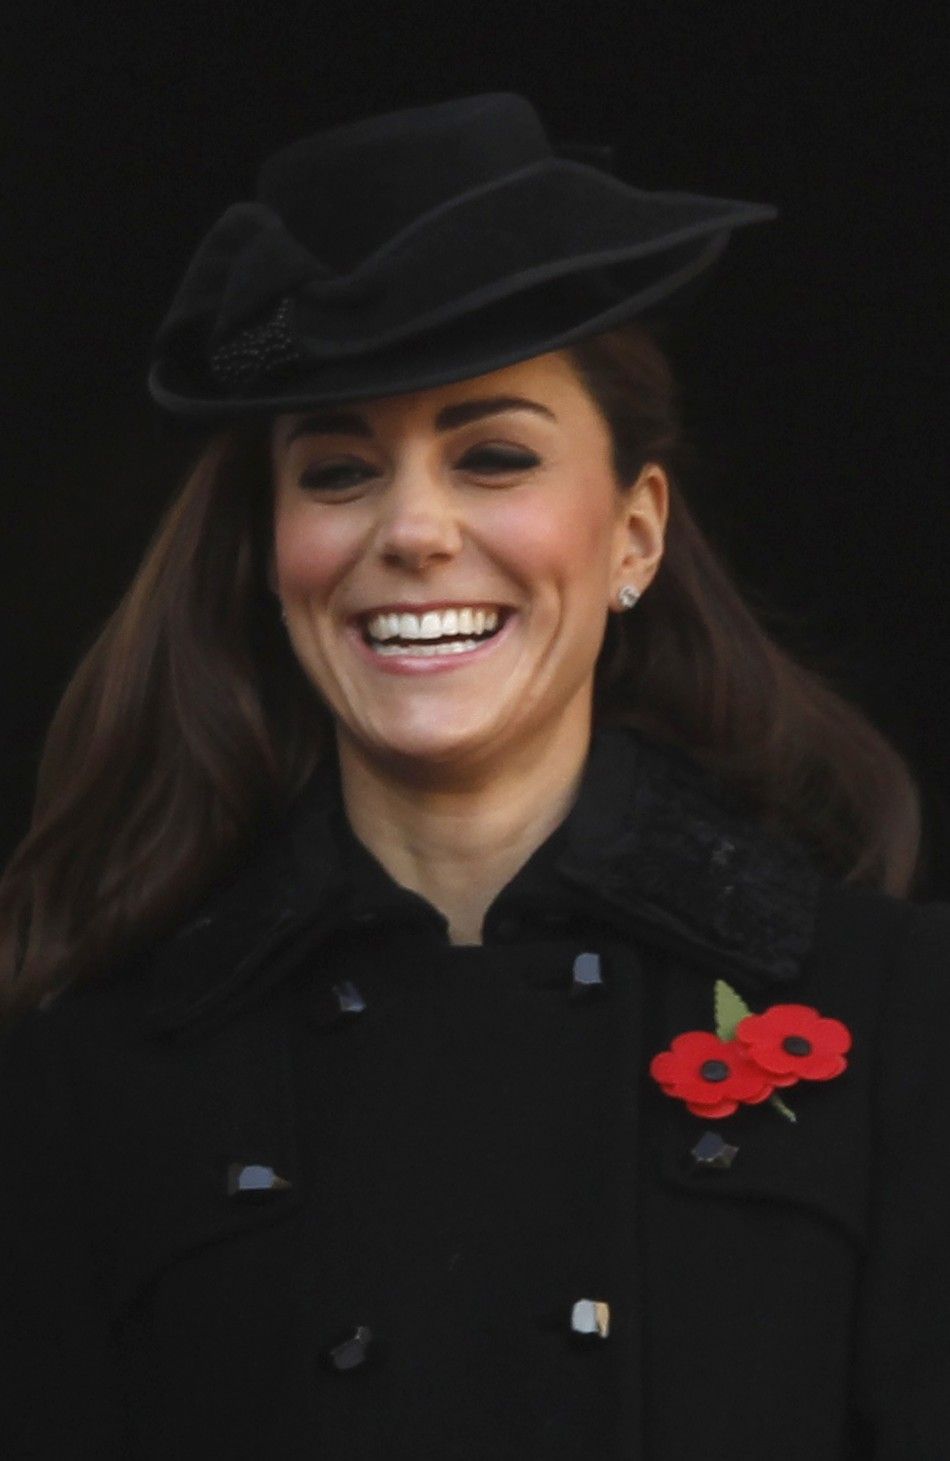 Kate Middleton Dons All Black for Remembrance Day Ceremony [PHOTOS]